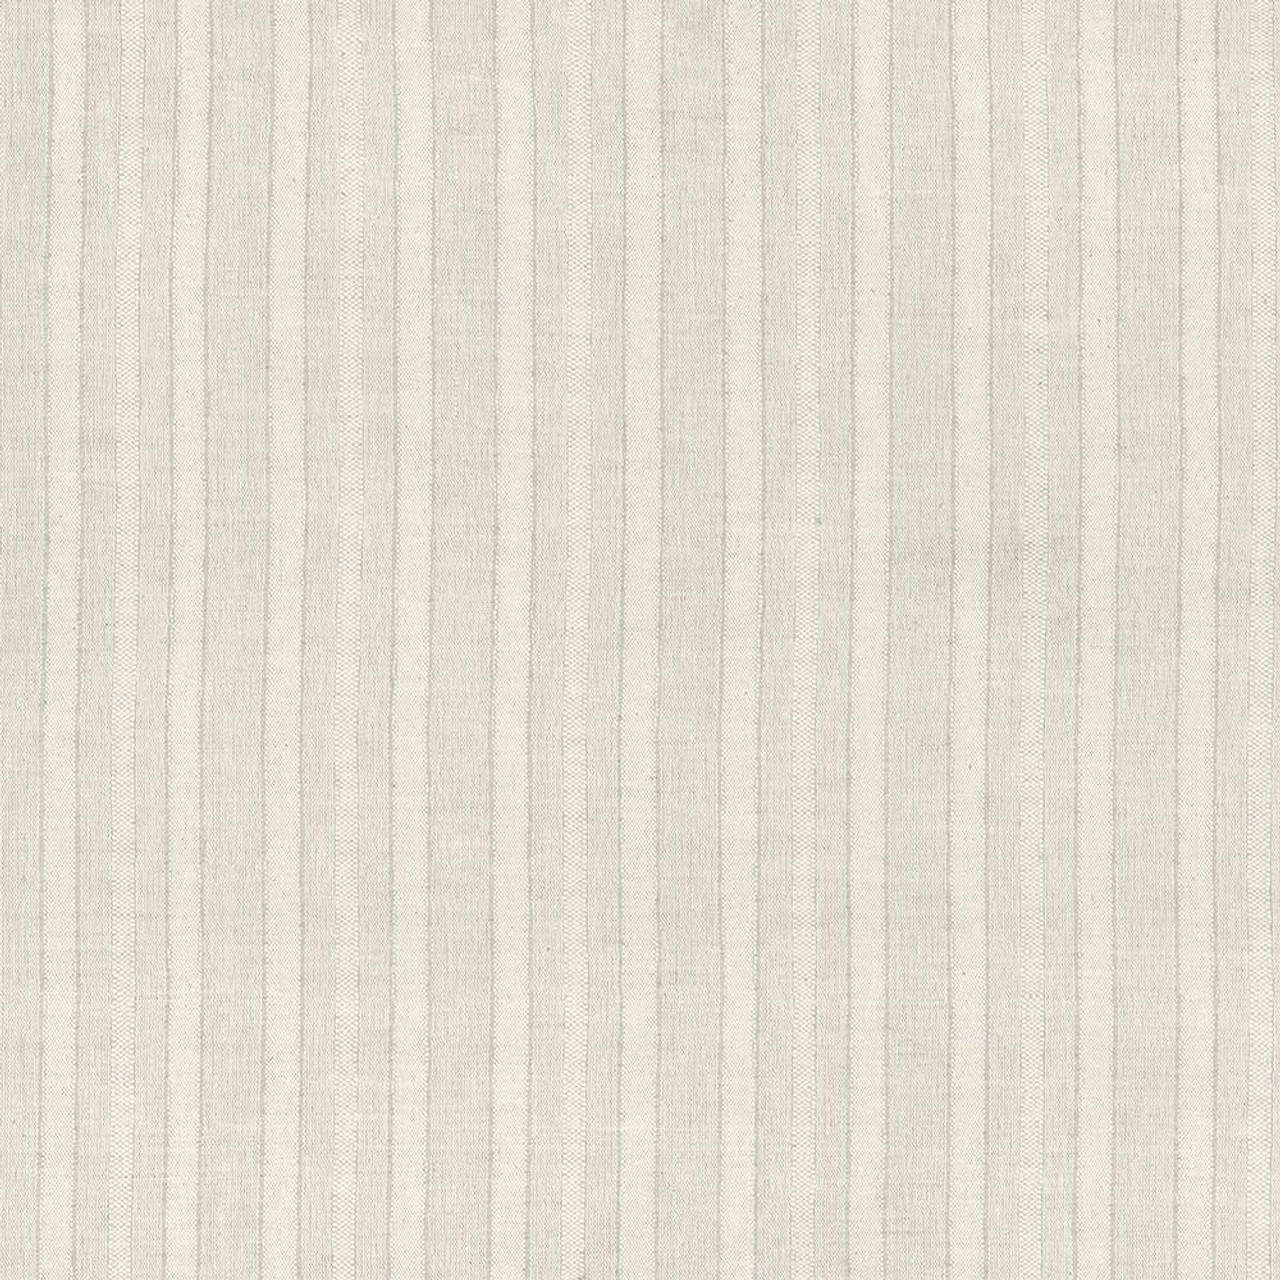 Striped Fabric in Natural Off-White / Mint Green / Grey / Brown, Upholstery / Slipcovers / Drapery, 54 Wide, By the Yard